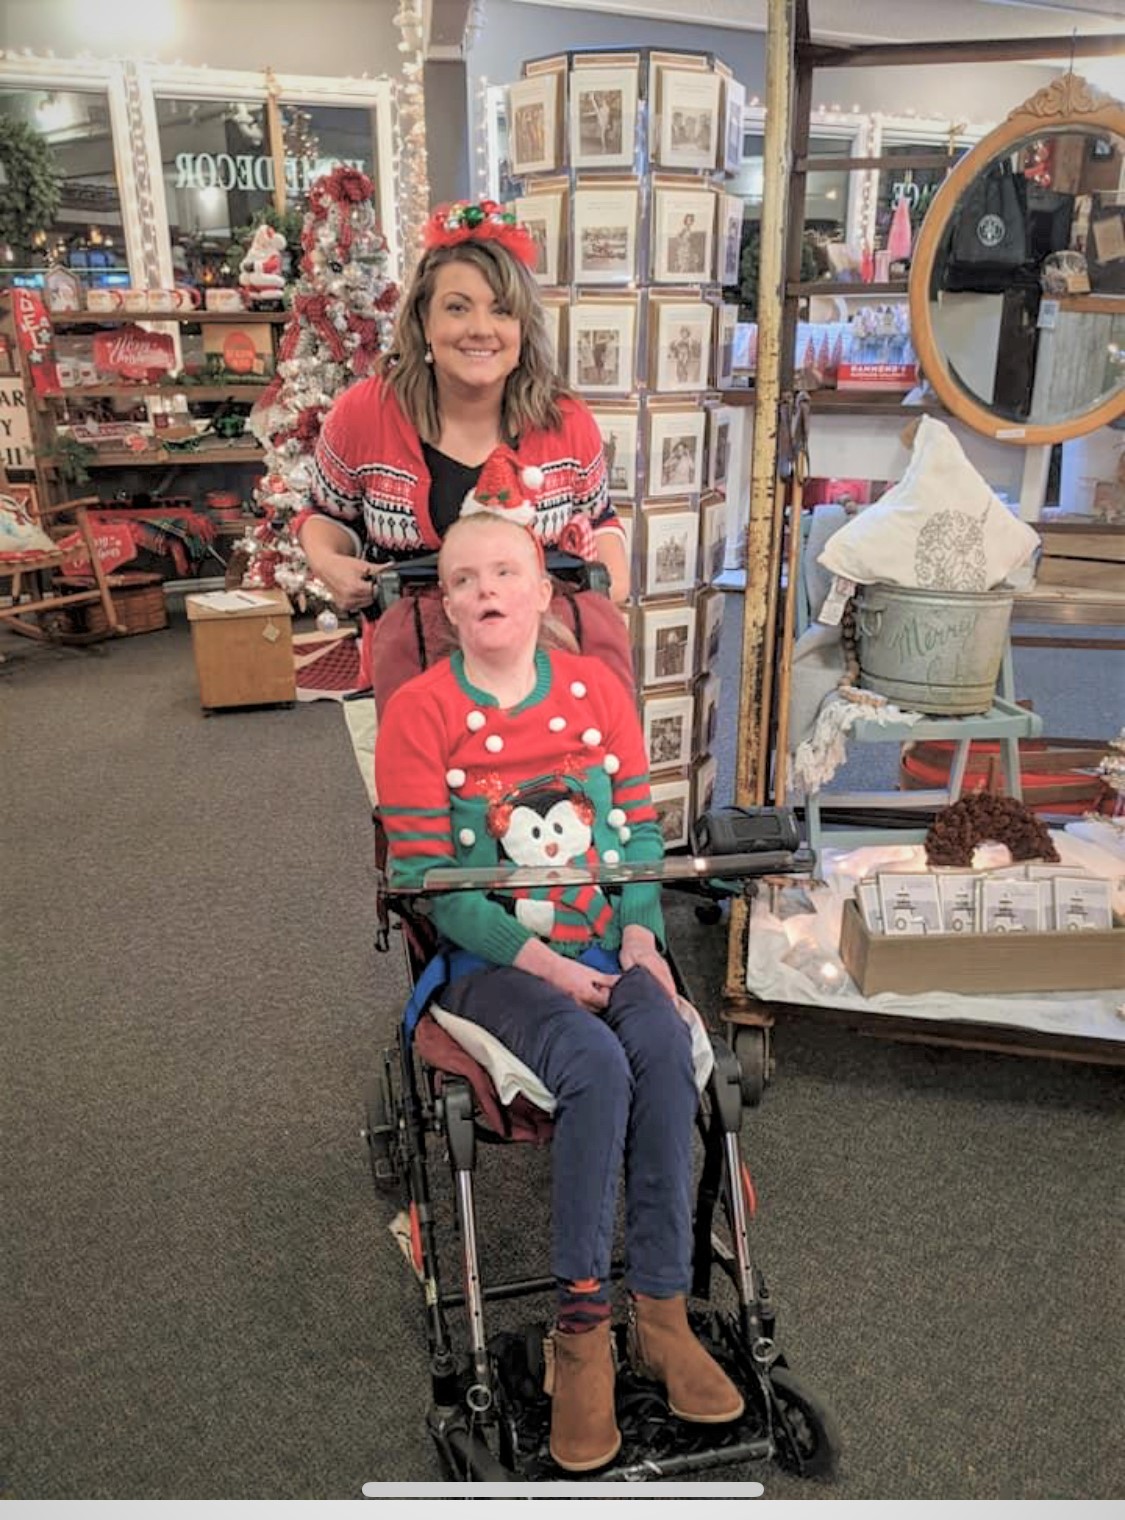 Image: Woman sitting in a wheelchair wearing a Christmas sweater with a penguin on it. Her Job Coach stands behind her, also dressed in a red christmas sweater. They apeear to be in a christmas store with cards and decorations behind them.